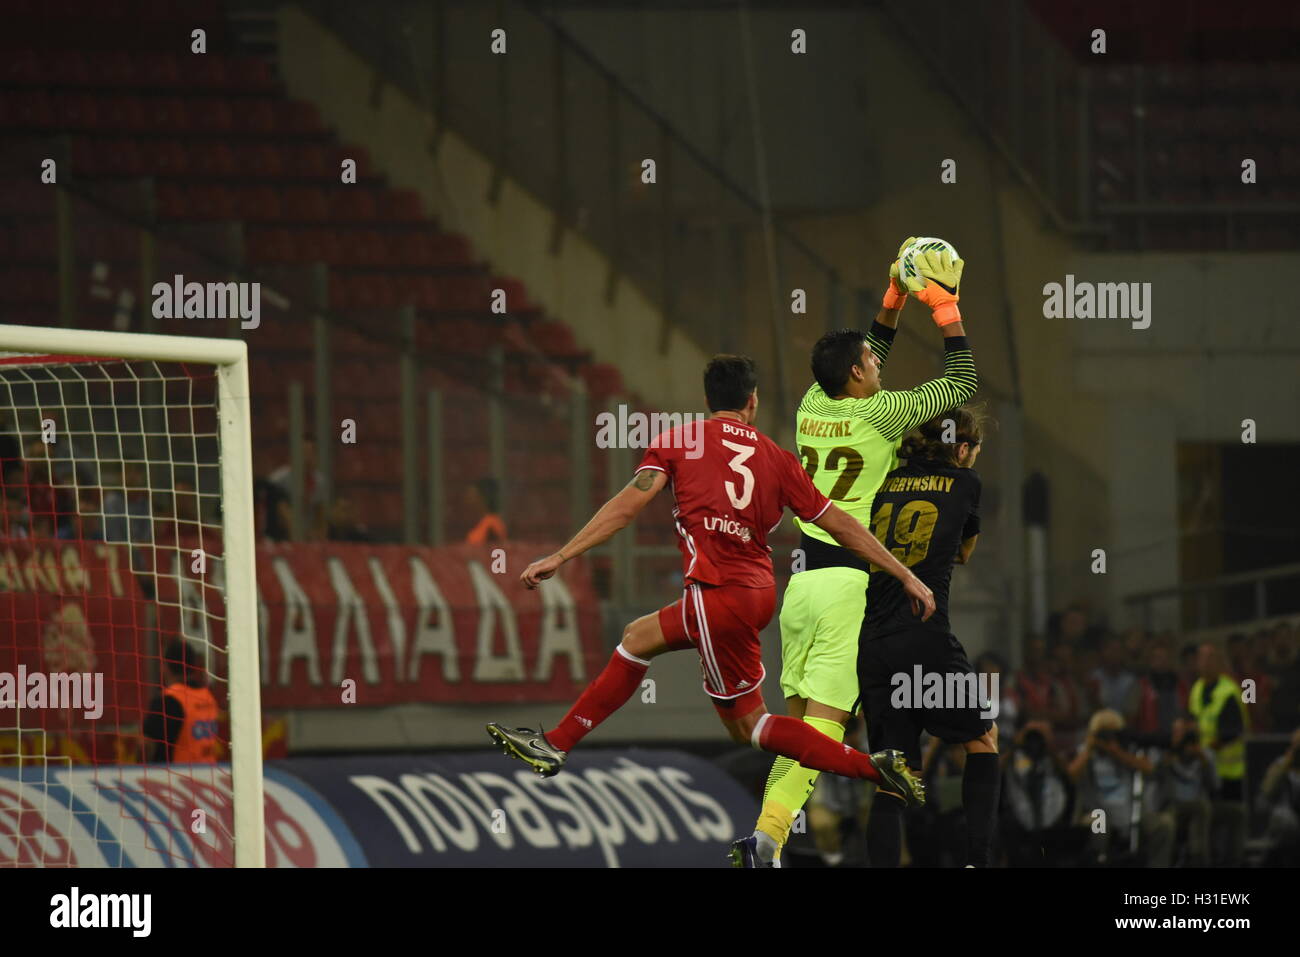 Athens, Greece. 02nd Oct, 2016. Goalkeeper Giannis Anestis (no 22) of AEK catch the ball in front of Alberto Botia (no 3) of Olympiacos and of Dmytro Chygrynskyy (no 19) of AEK. Triumph for Olympiacos (red) football team, who manage to win AEK (yellow-black) football team 3-0 for the Greek Super League. Credit:  Dimitrios Karvountzis/Pacific Press/Alamy Live News Stock Photo